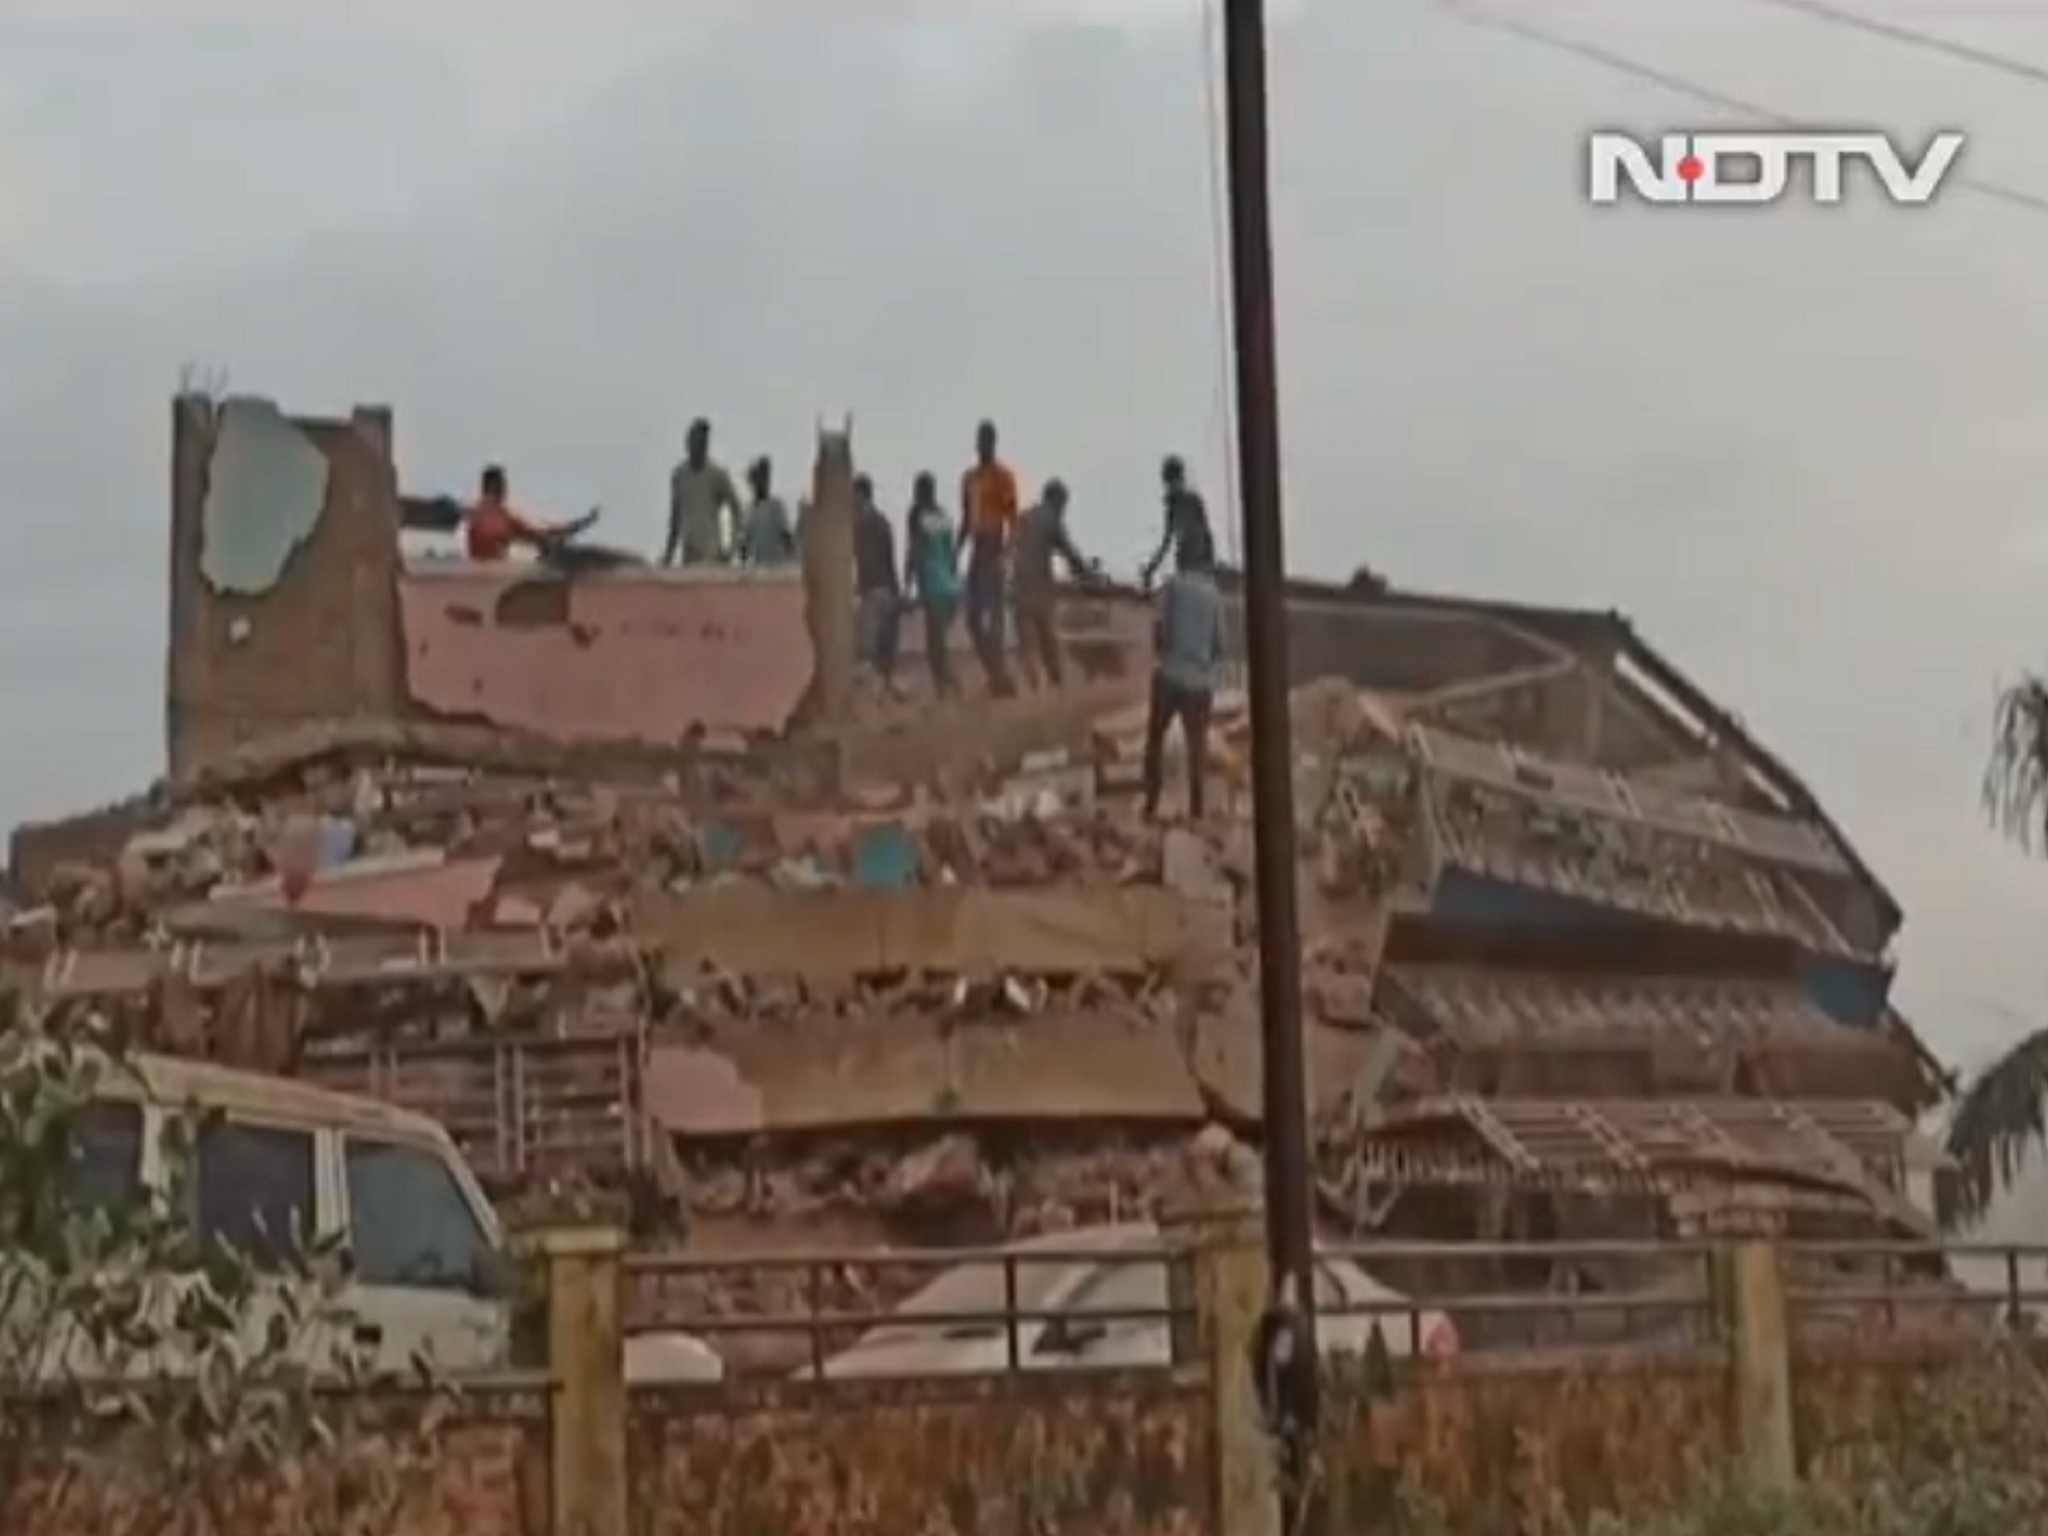 Screengrab from NDTV (New Delhi Television) video footage showing the collapse of a five-storey building in Mahad, India, 24 August 2020.